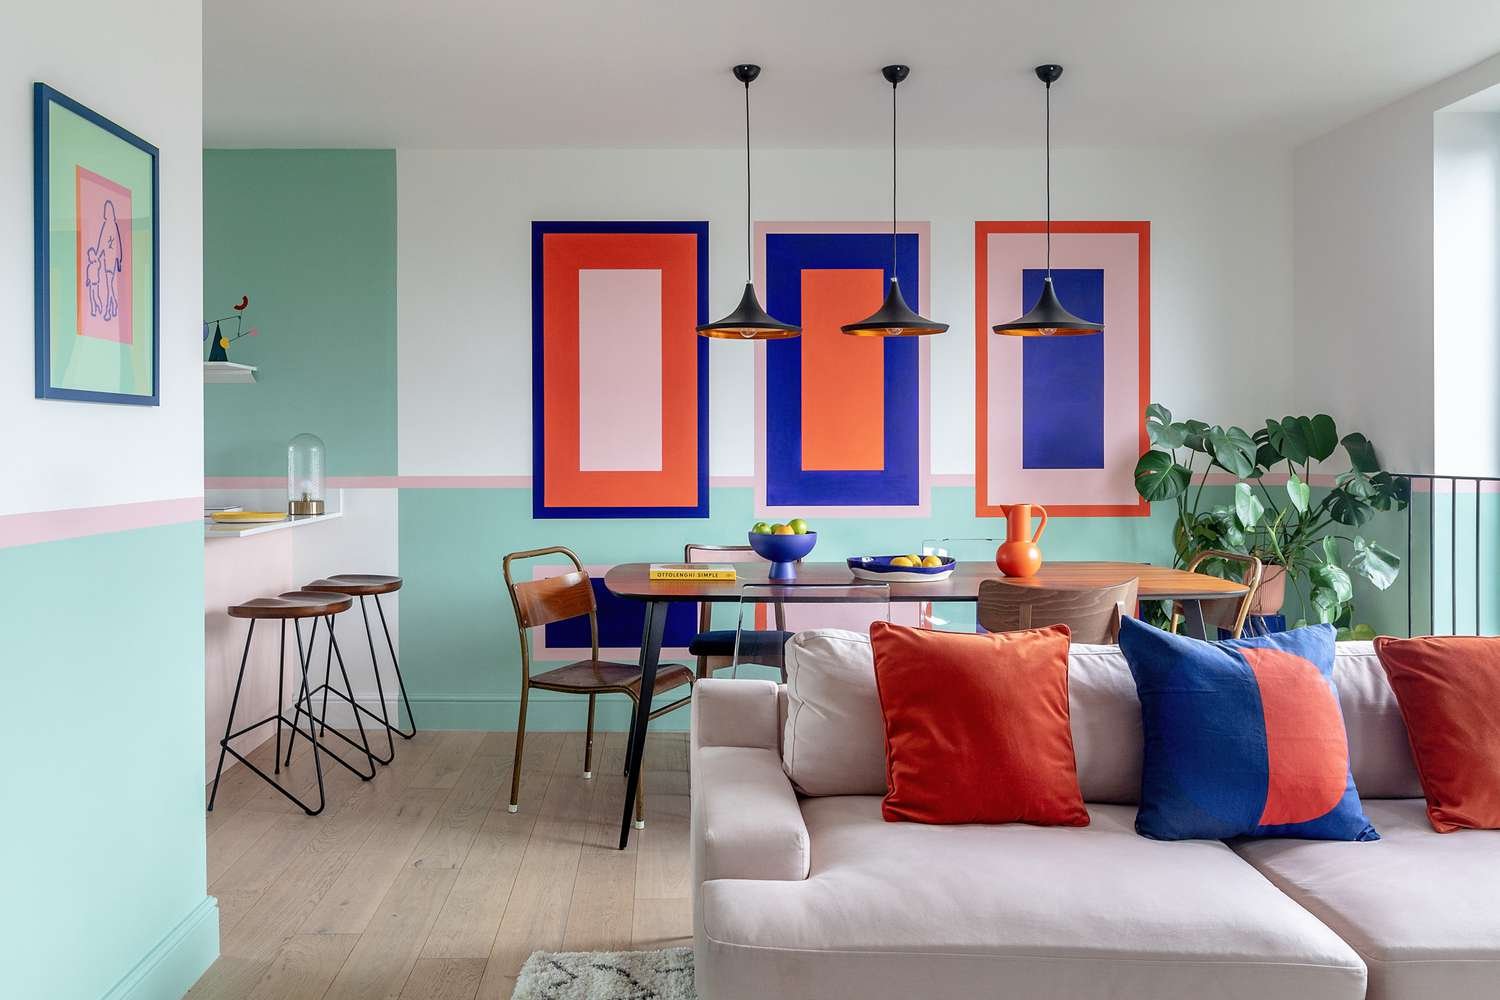 Dopamine décor is the design trend guaranteed to make you happy